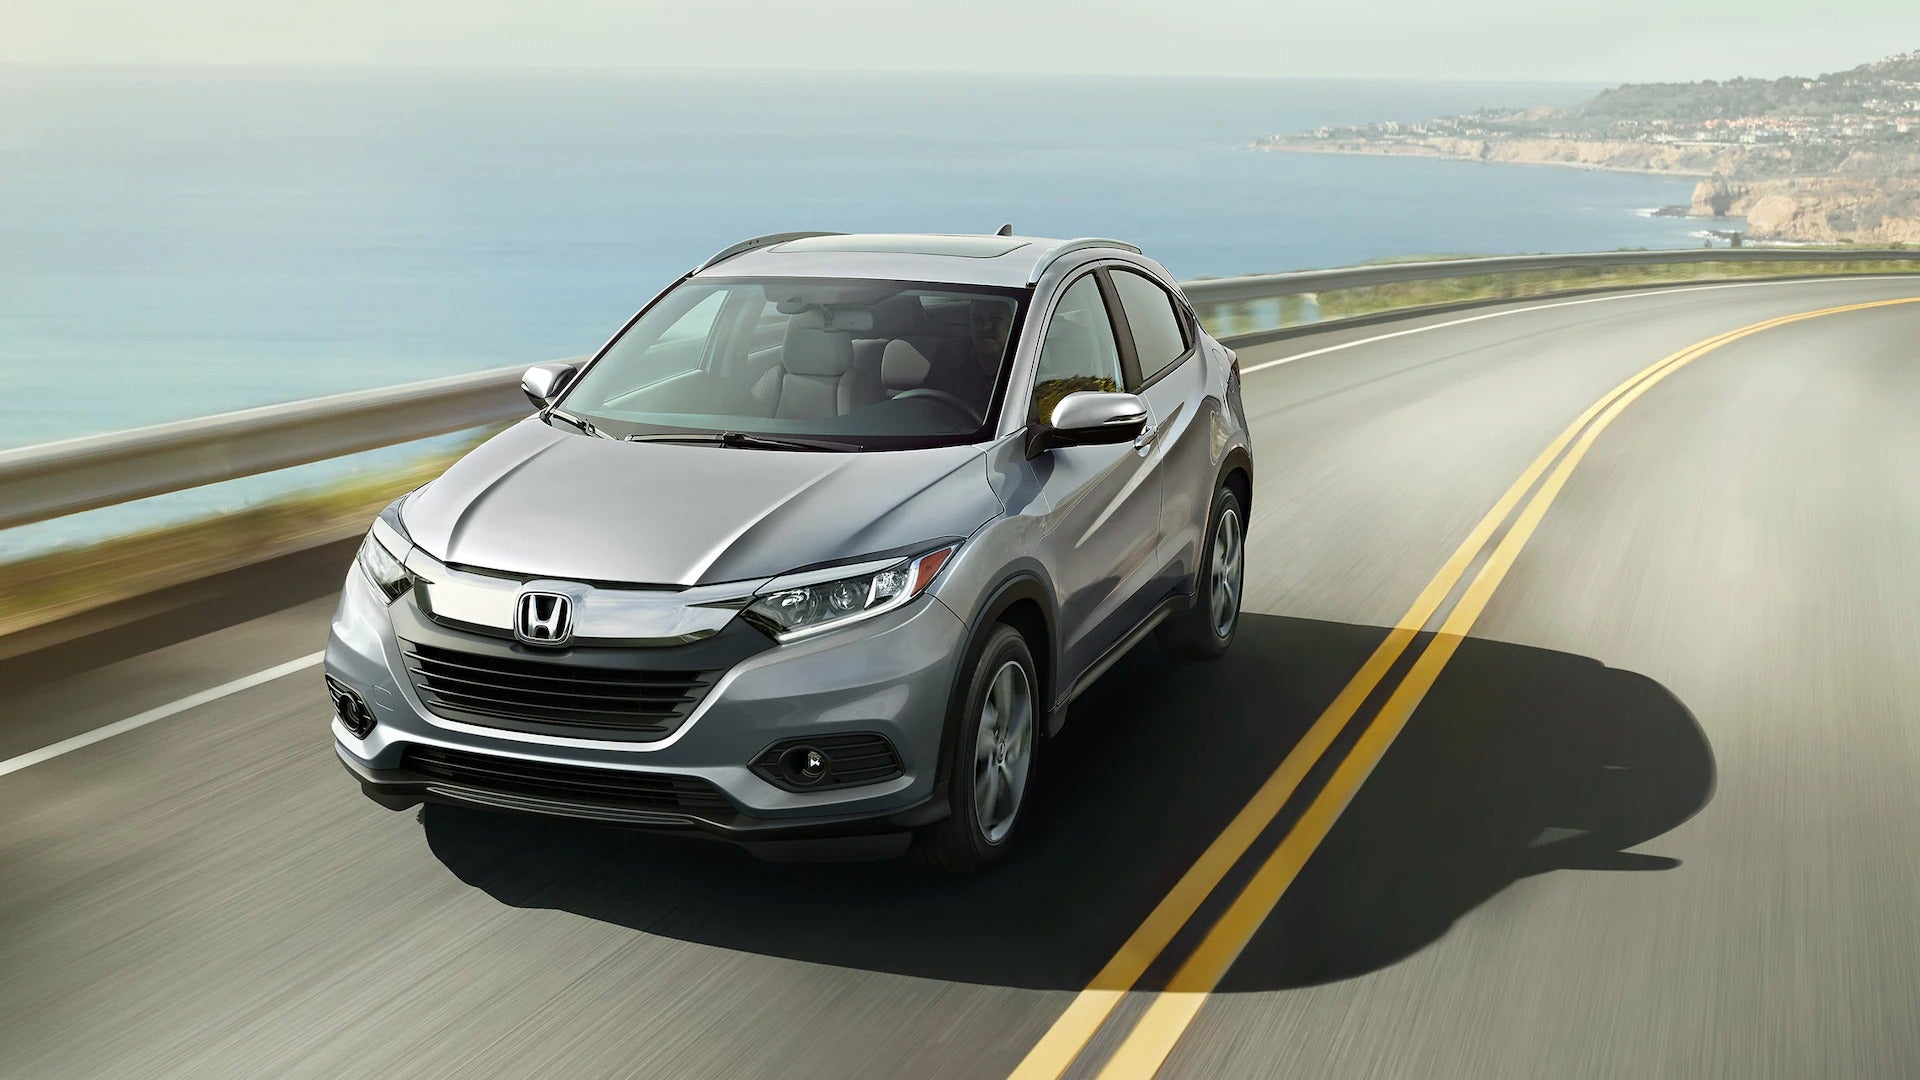 Grey 2023 Honda HR-V driving on a road near a body of water